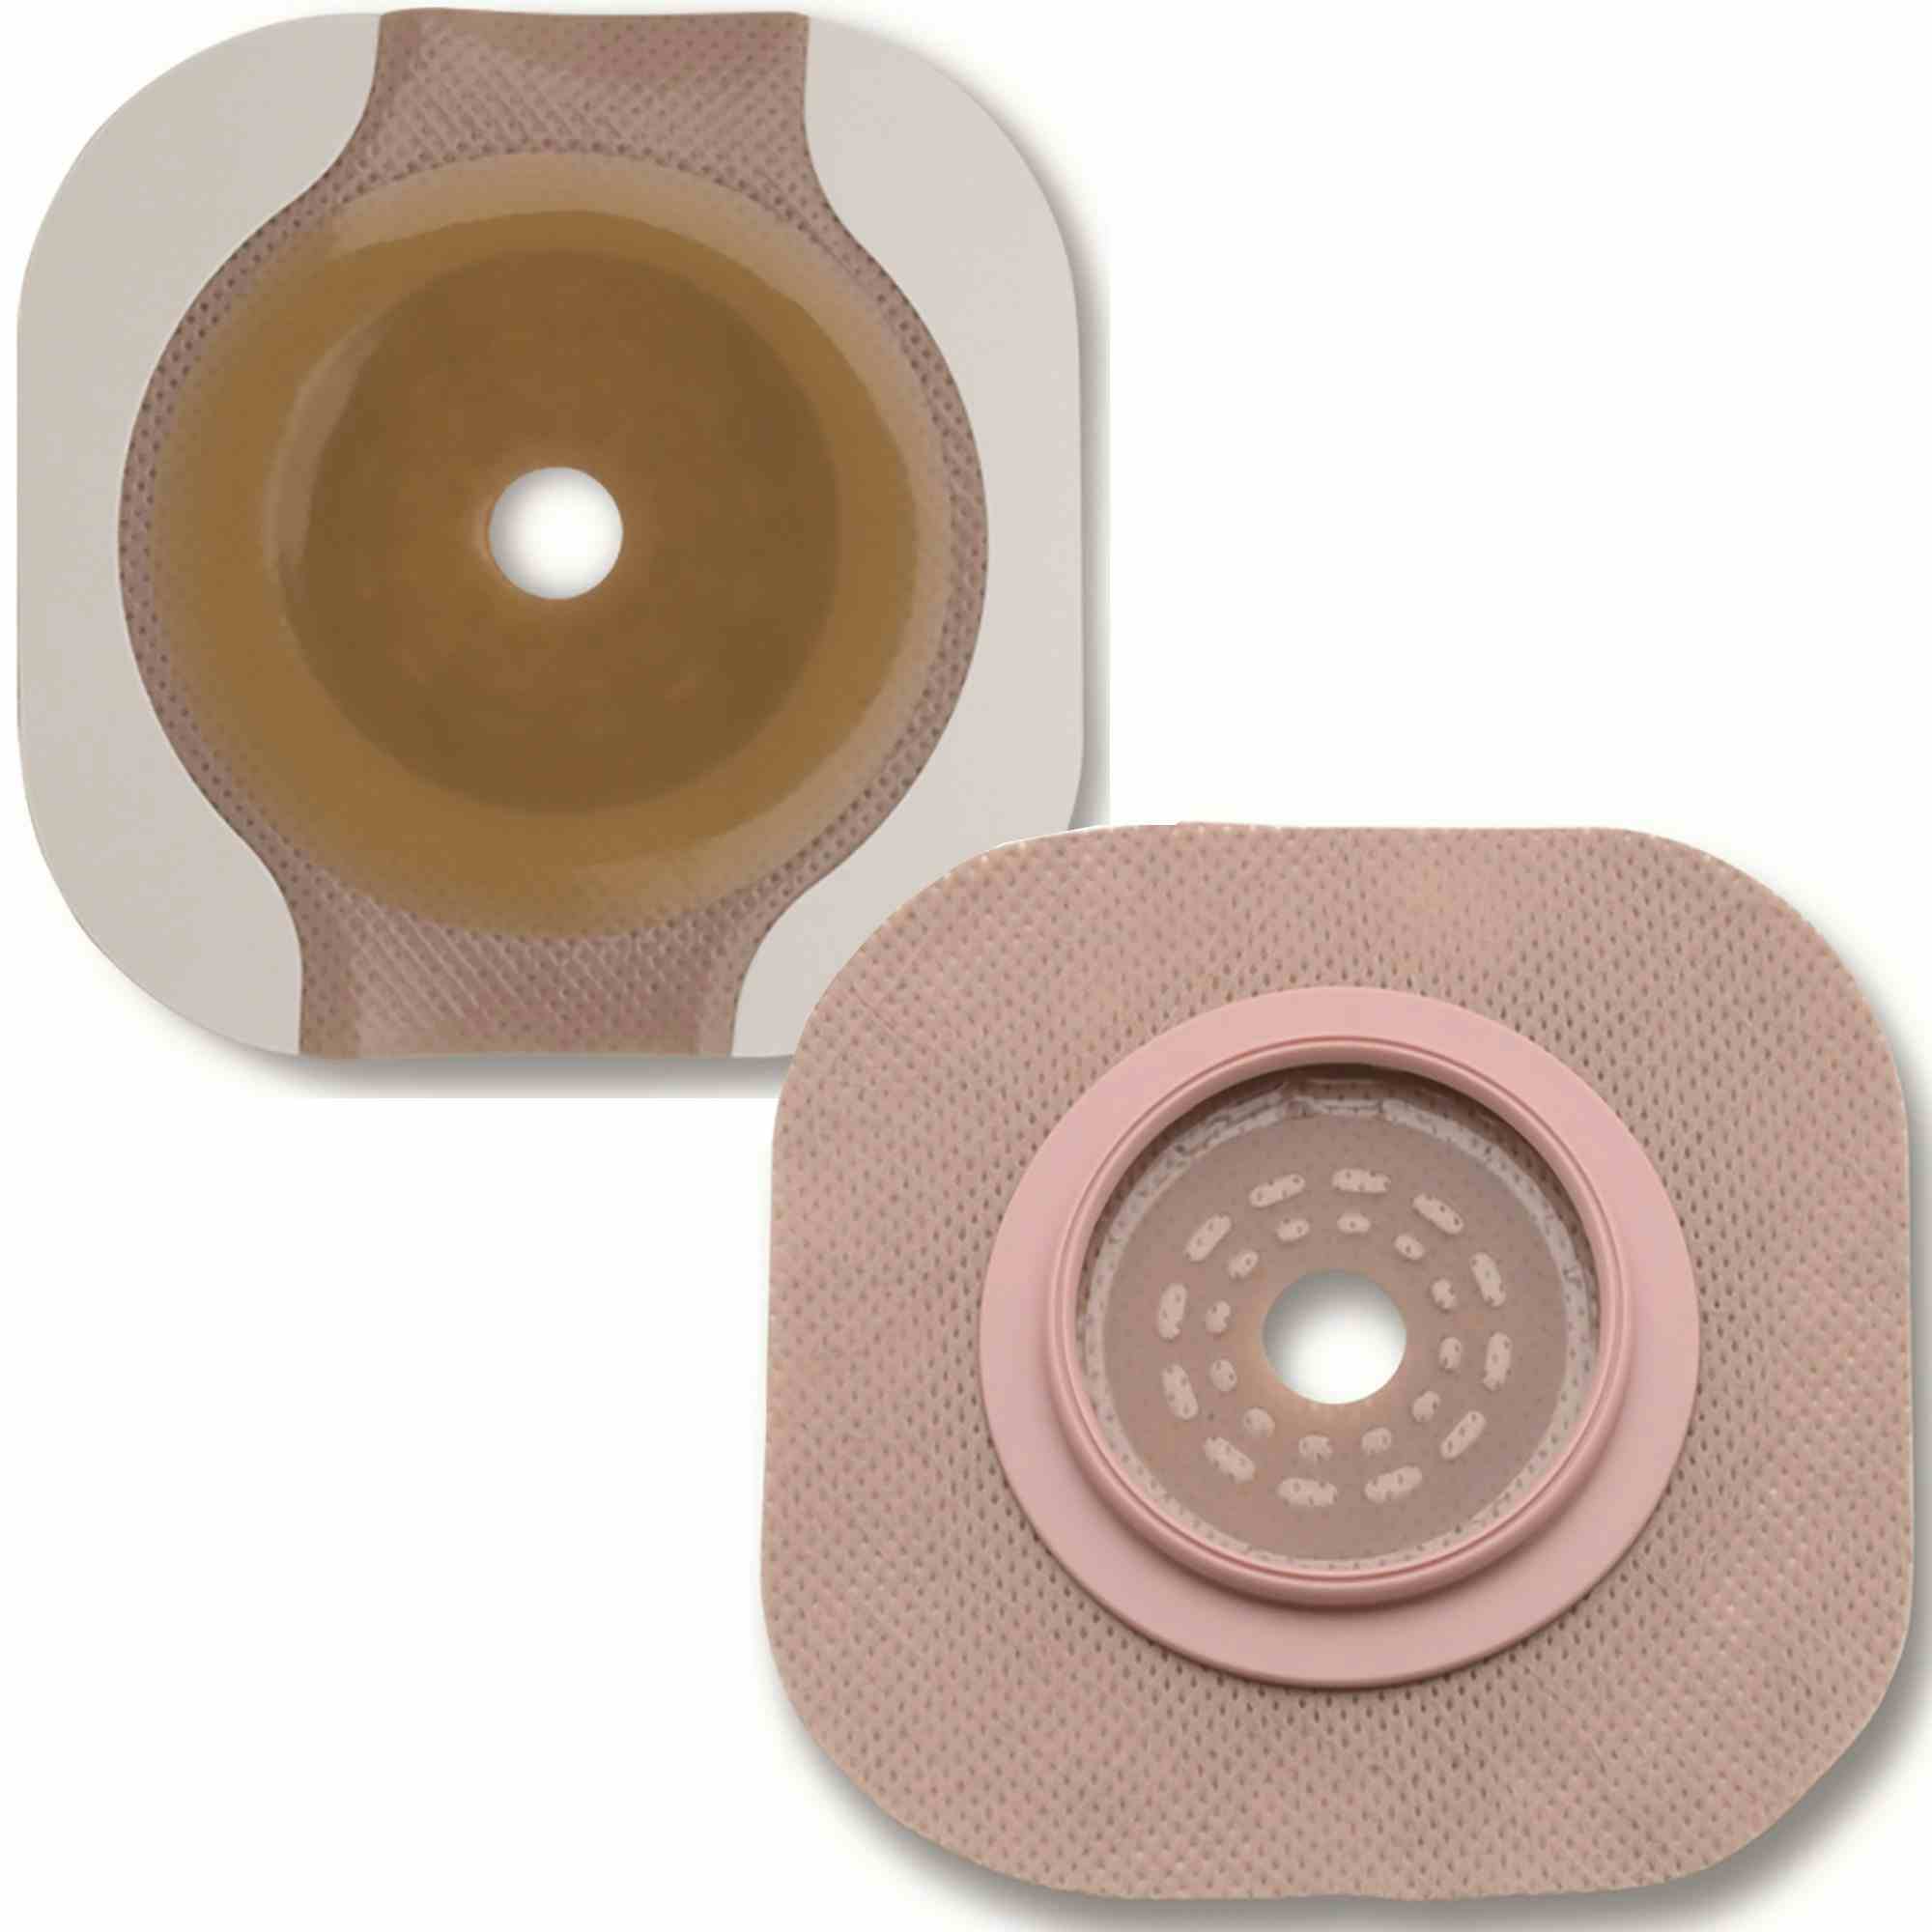 New Image Flextend Ostomy Barrier, Trim to Fit, 102 mm Flange, 14606, Box of 5